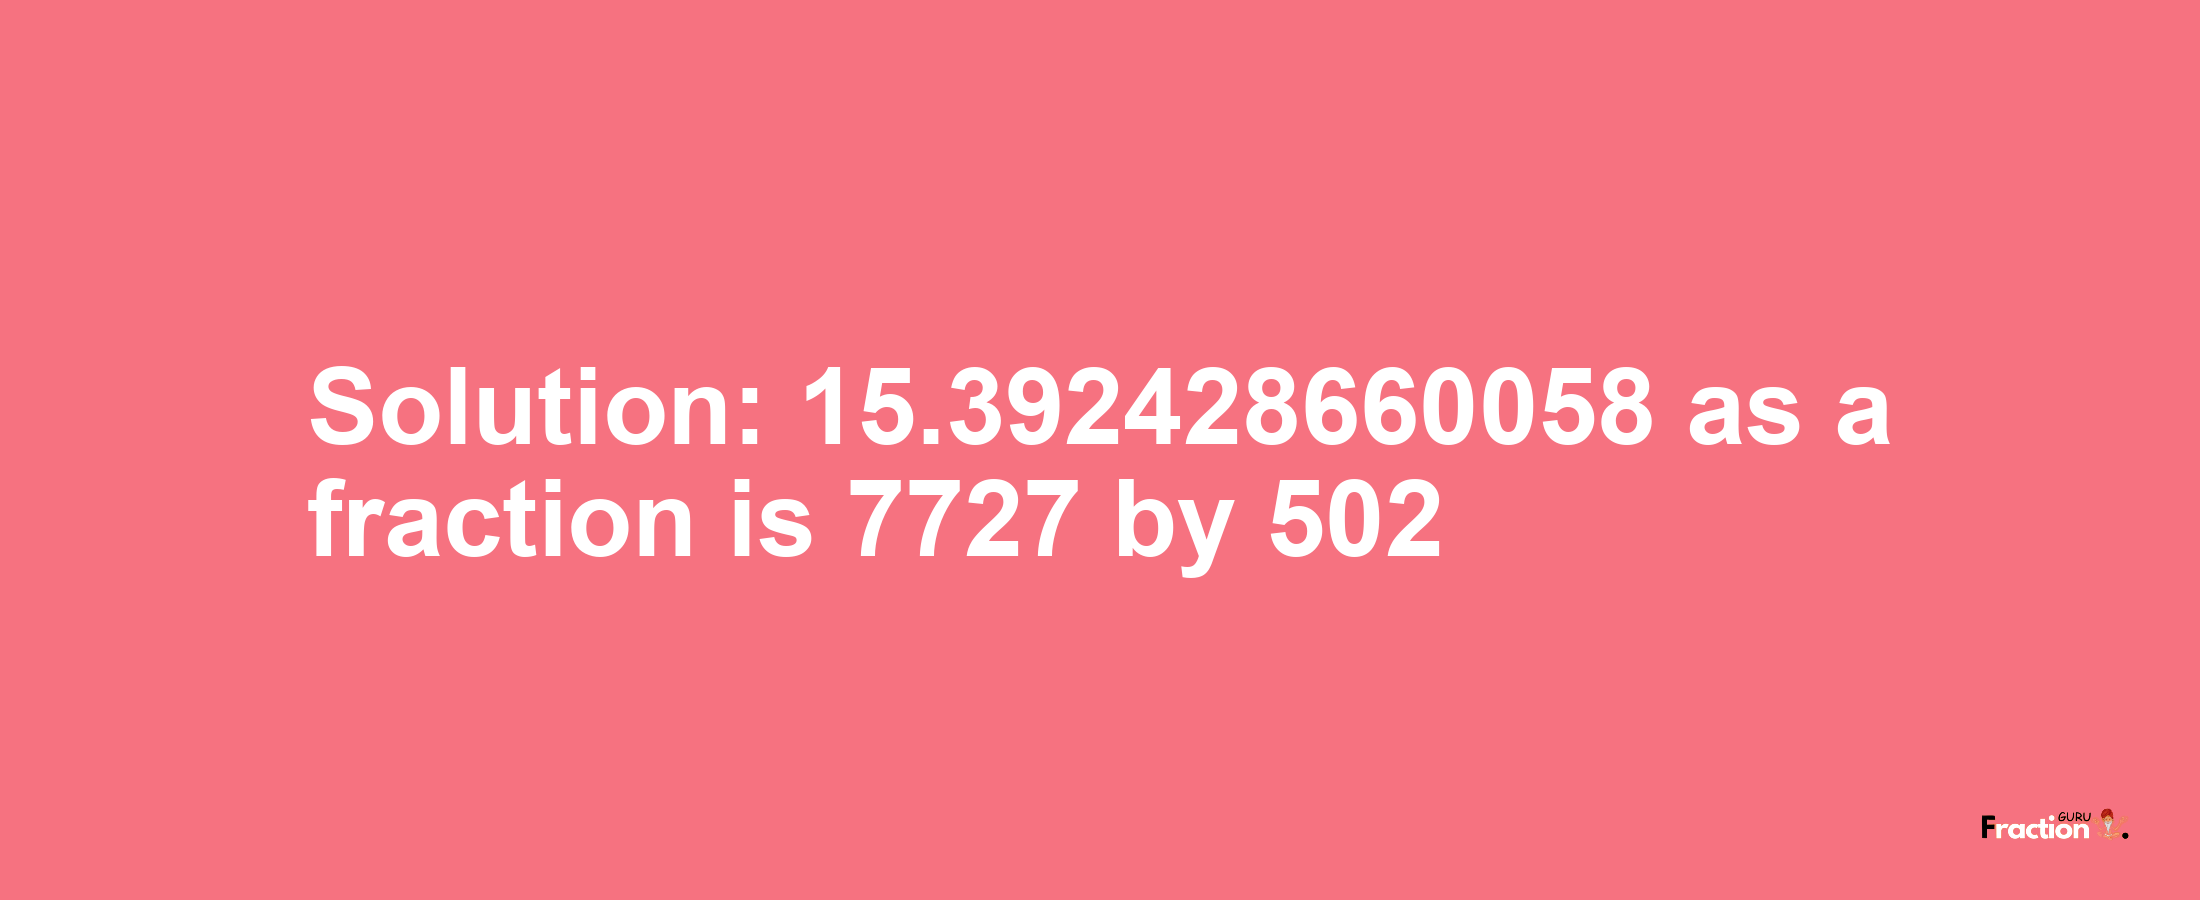 Solution:15.392428660058 as a fraction is 7727/502